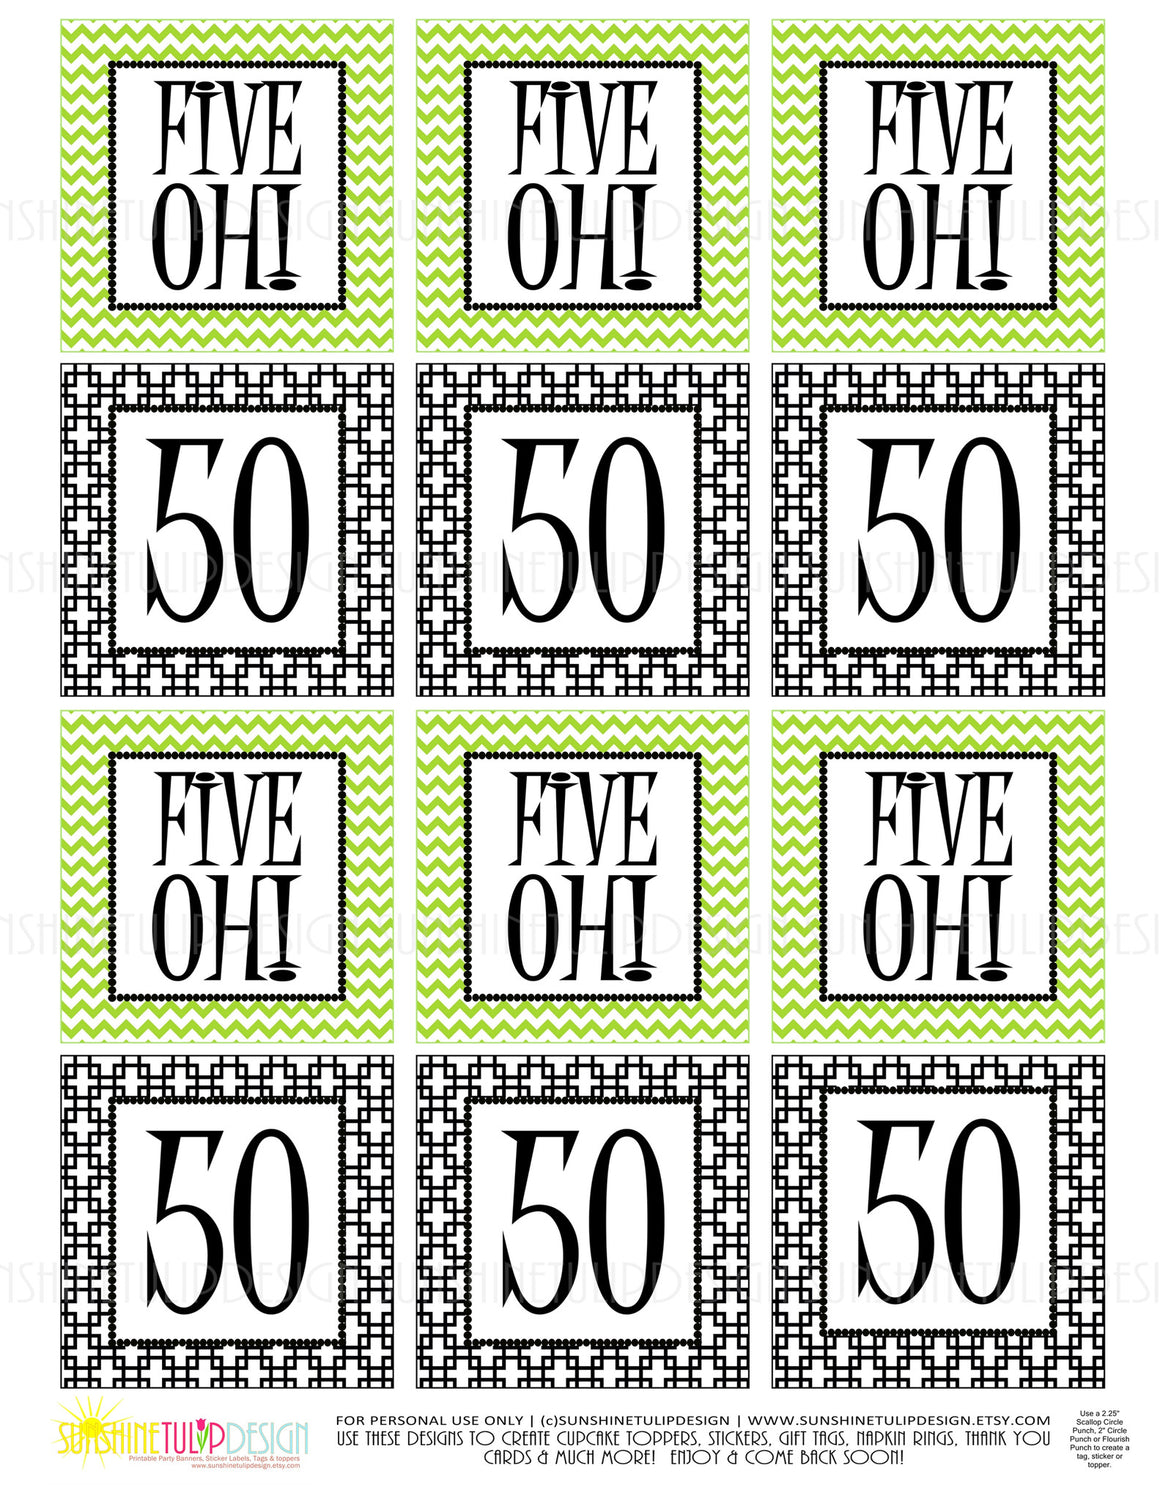 Printable 50th Birthday Five Oh! Lime Green & Black Cupcake Toppers, Sticker Labels & Party Favor Tags - Sunshinetulipdesign - 1